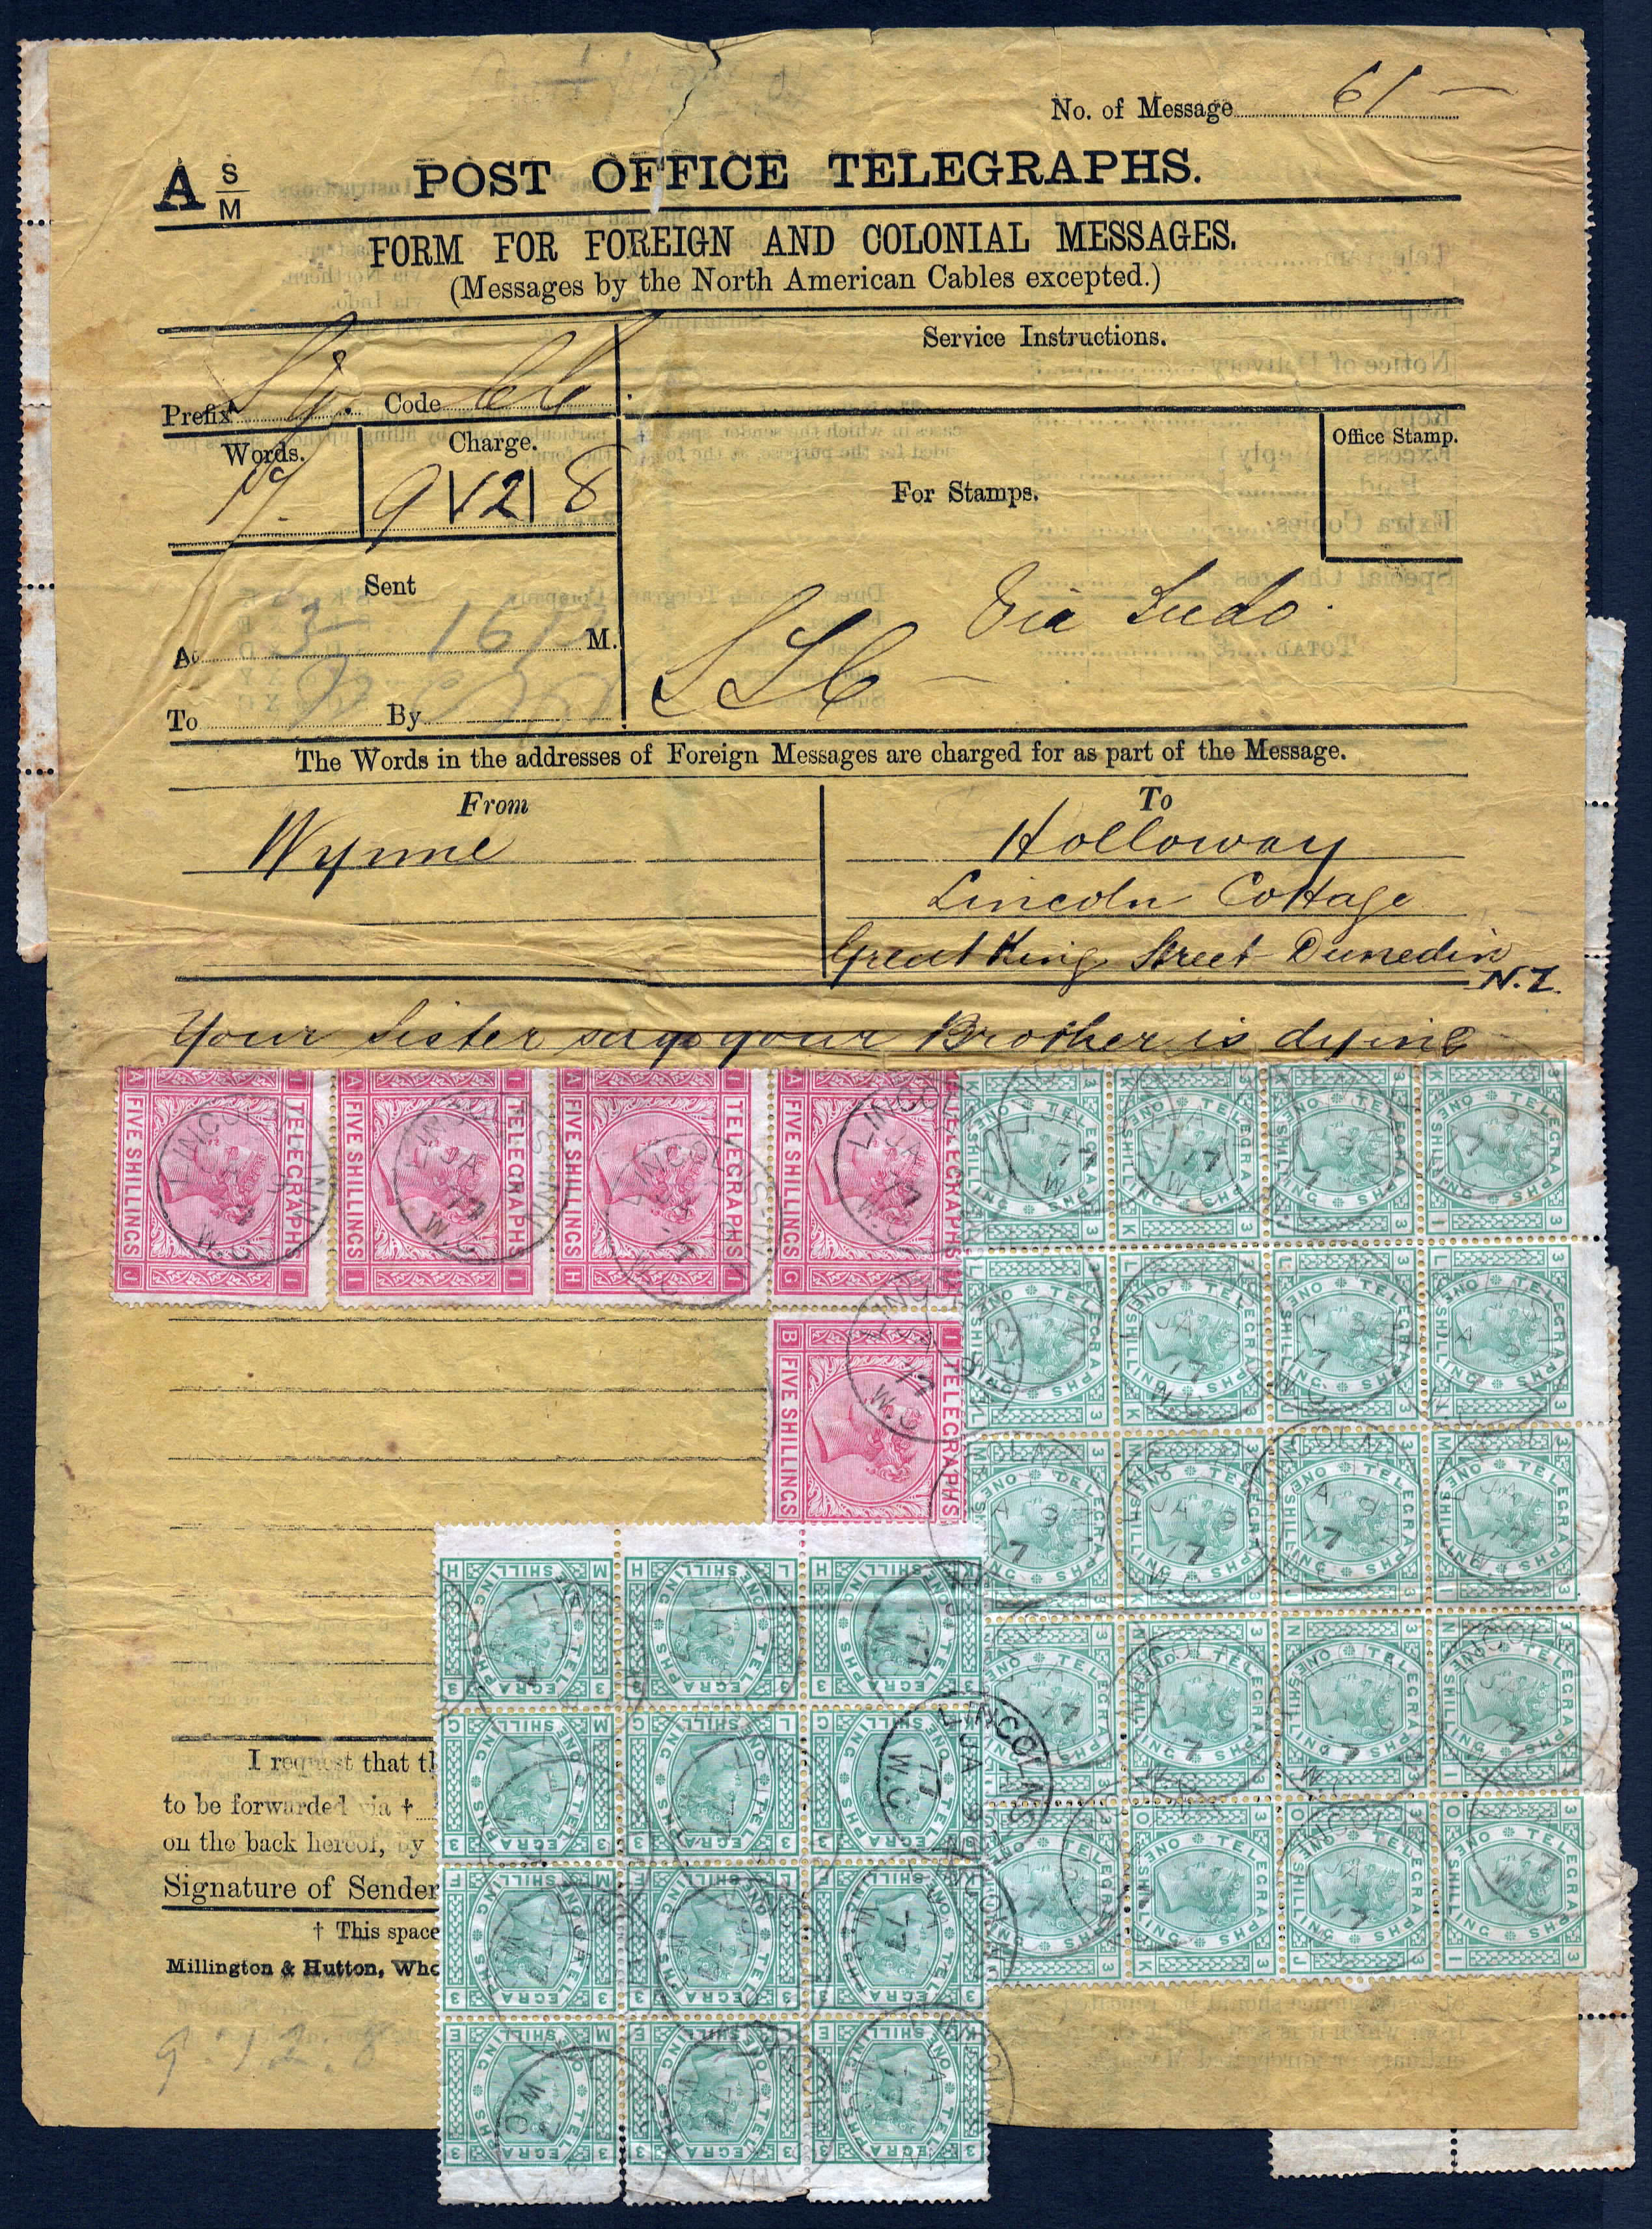 £9 12s 8d ASM Telegraph to New Zealand - front